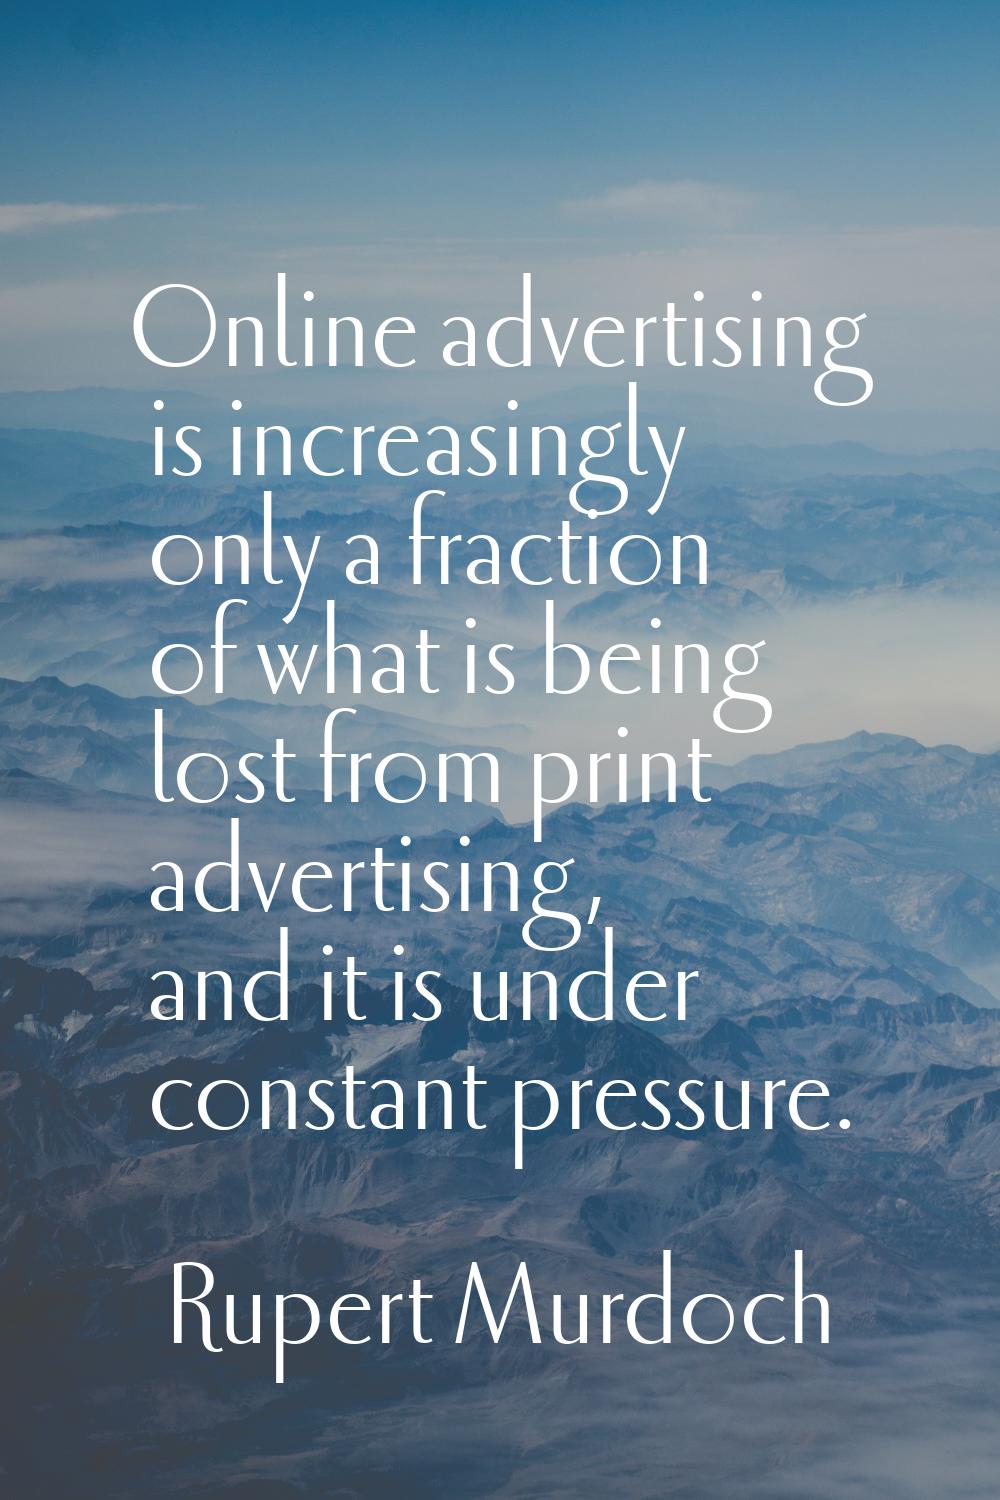 Online advertising is increasingly only a fraction of what is being lost from print advertising, an